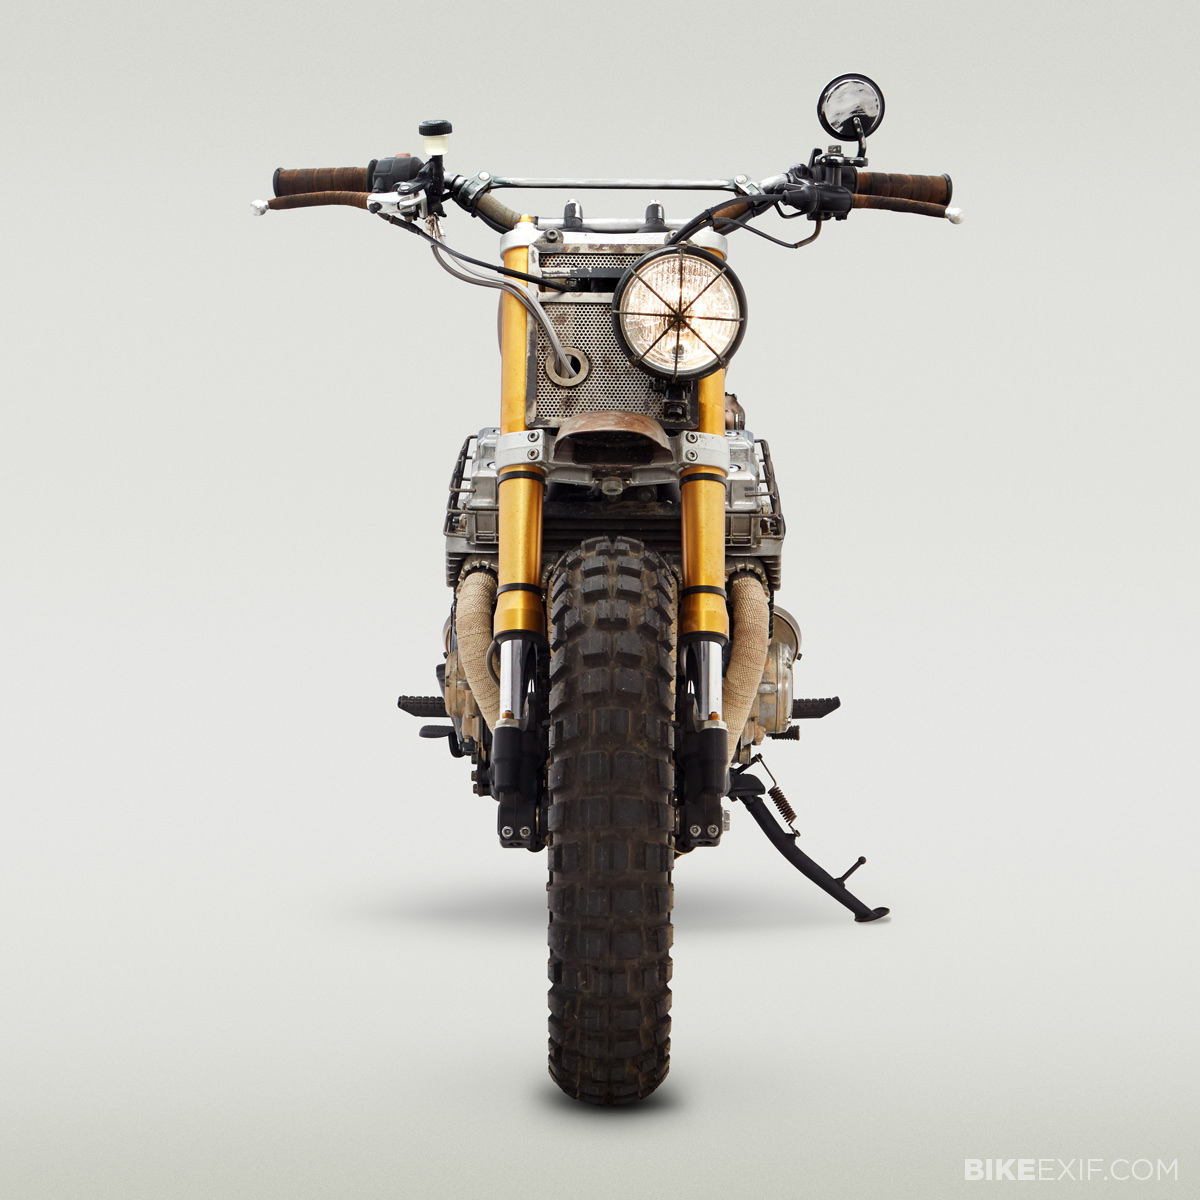 The Walking Dead The Daryl Dixon Motorcycle Bike Exif